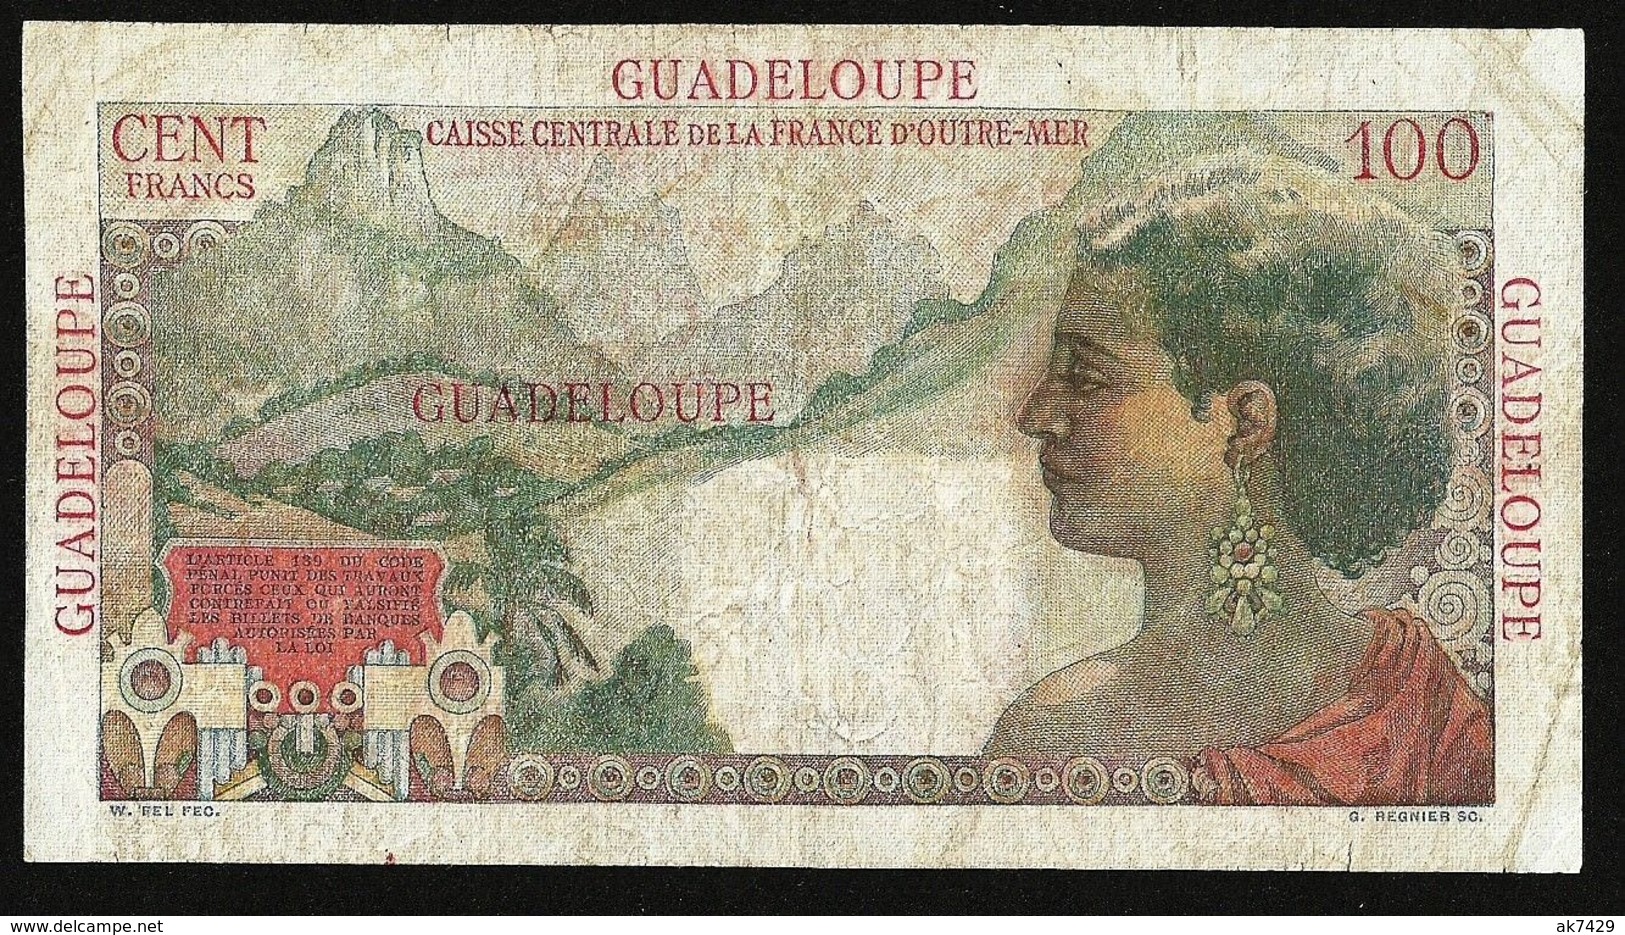 GUADELOUPE 100 FRANCS (1947-49) P-35 VF - Other - America